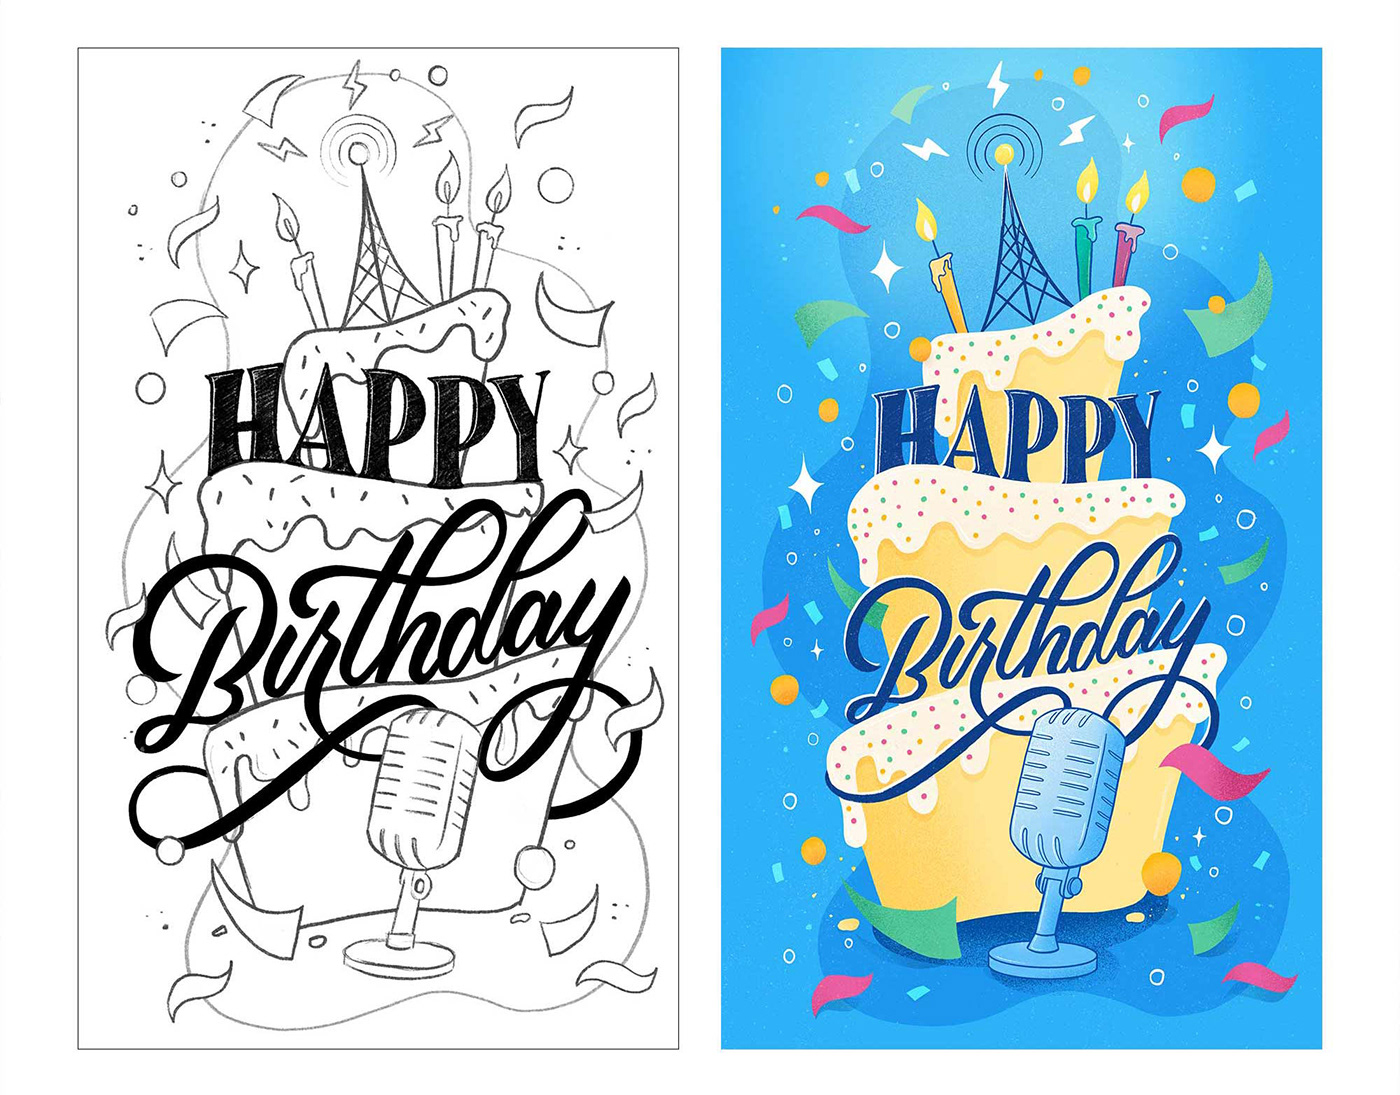 Sketch and color version of lettering and illustration with a cake and radio tower and confetti